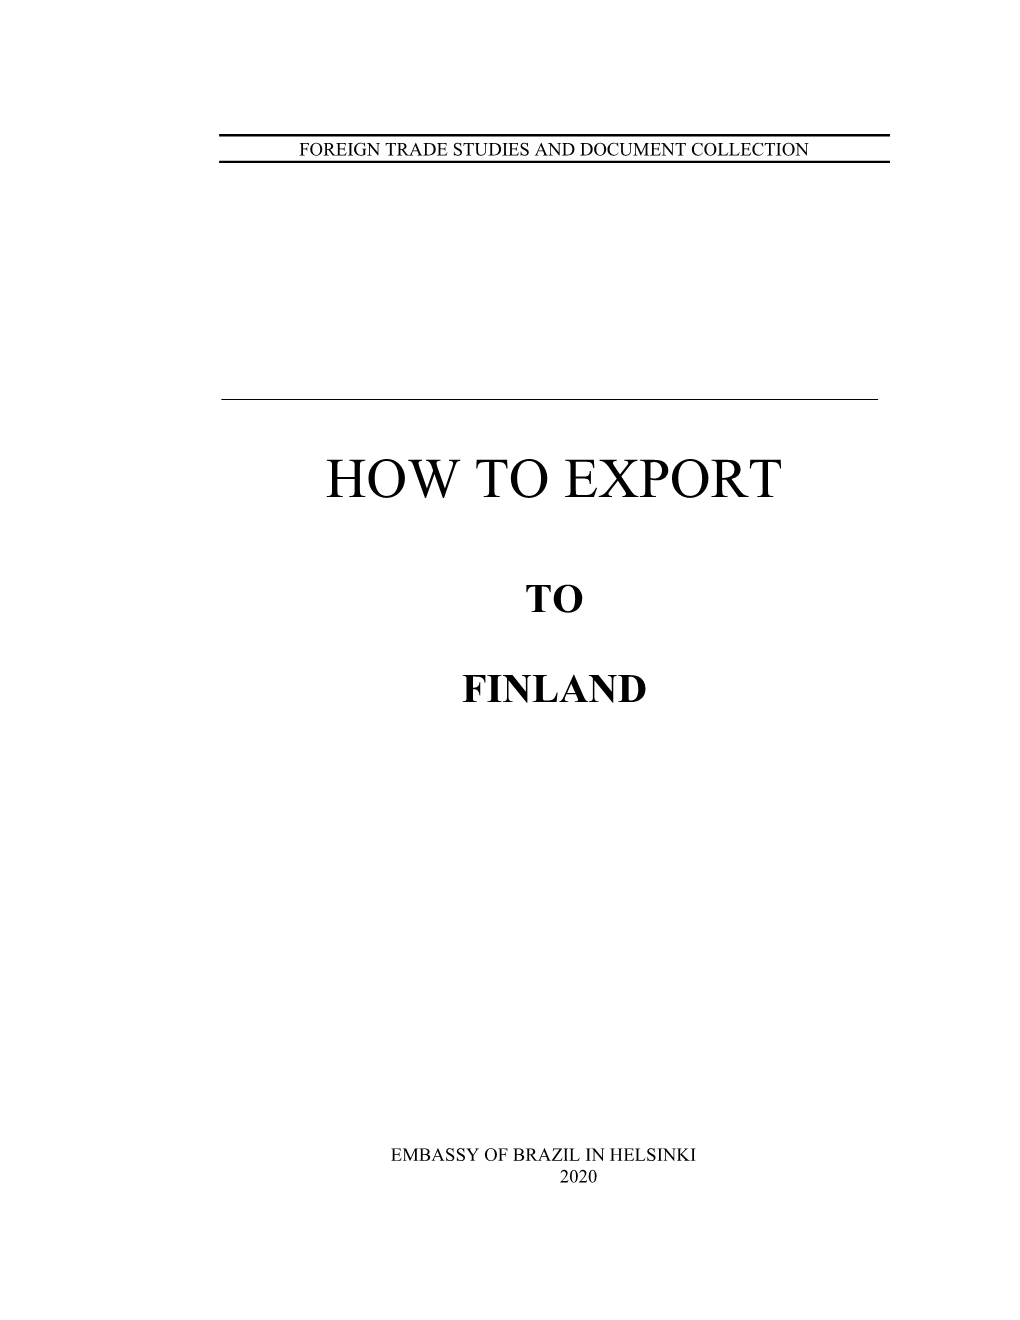 How to Export